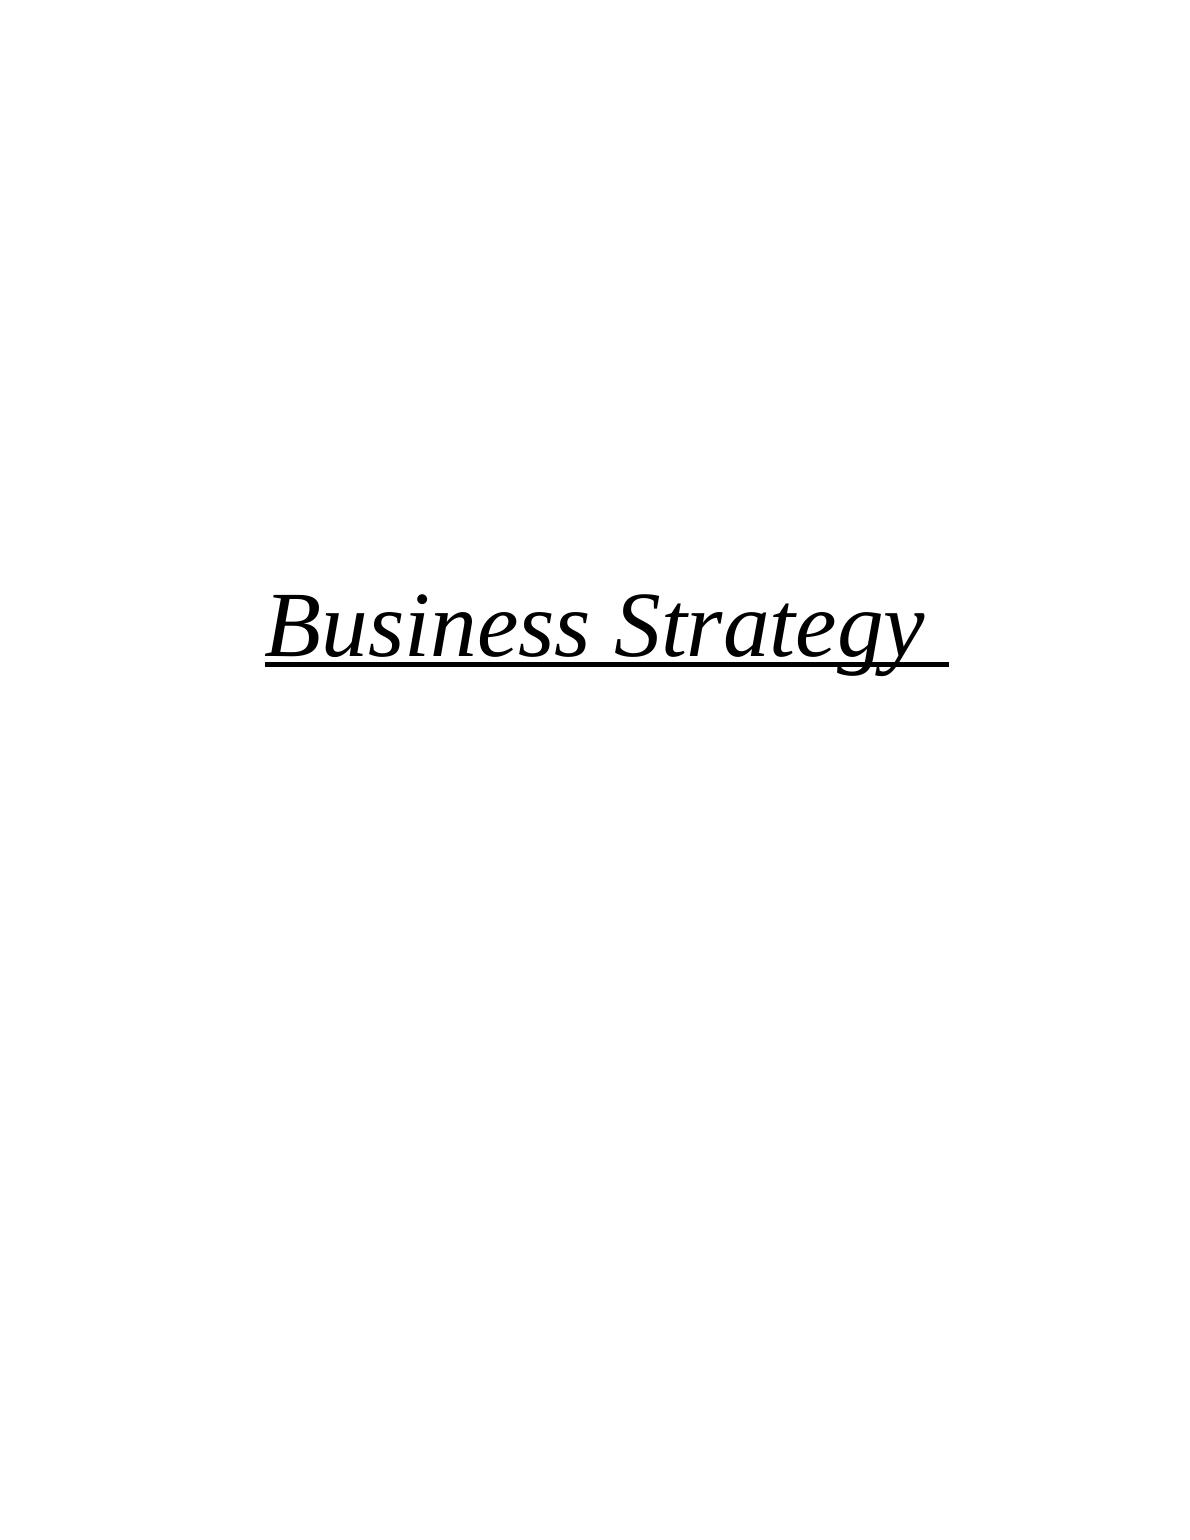 Business Strategy For John Lewis Ltd_1